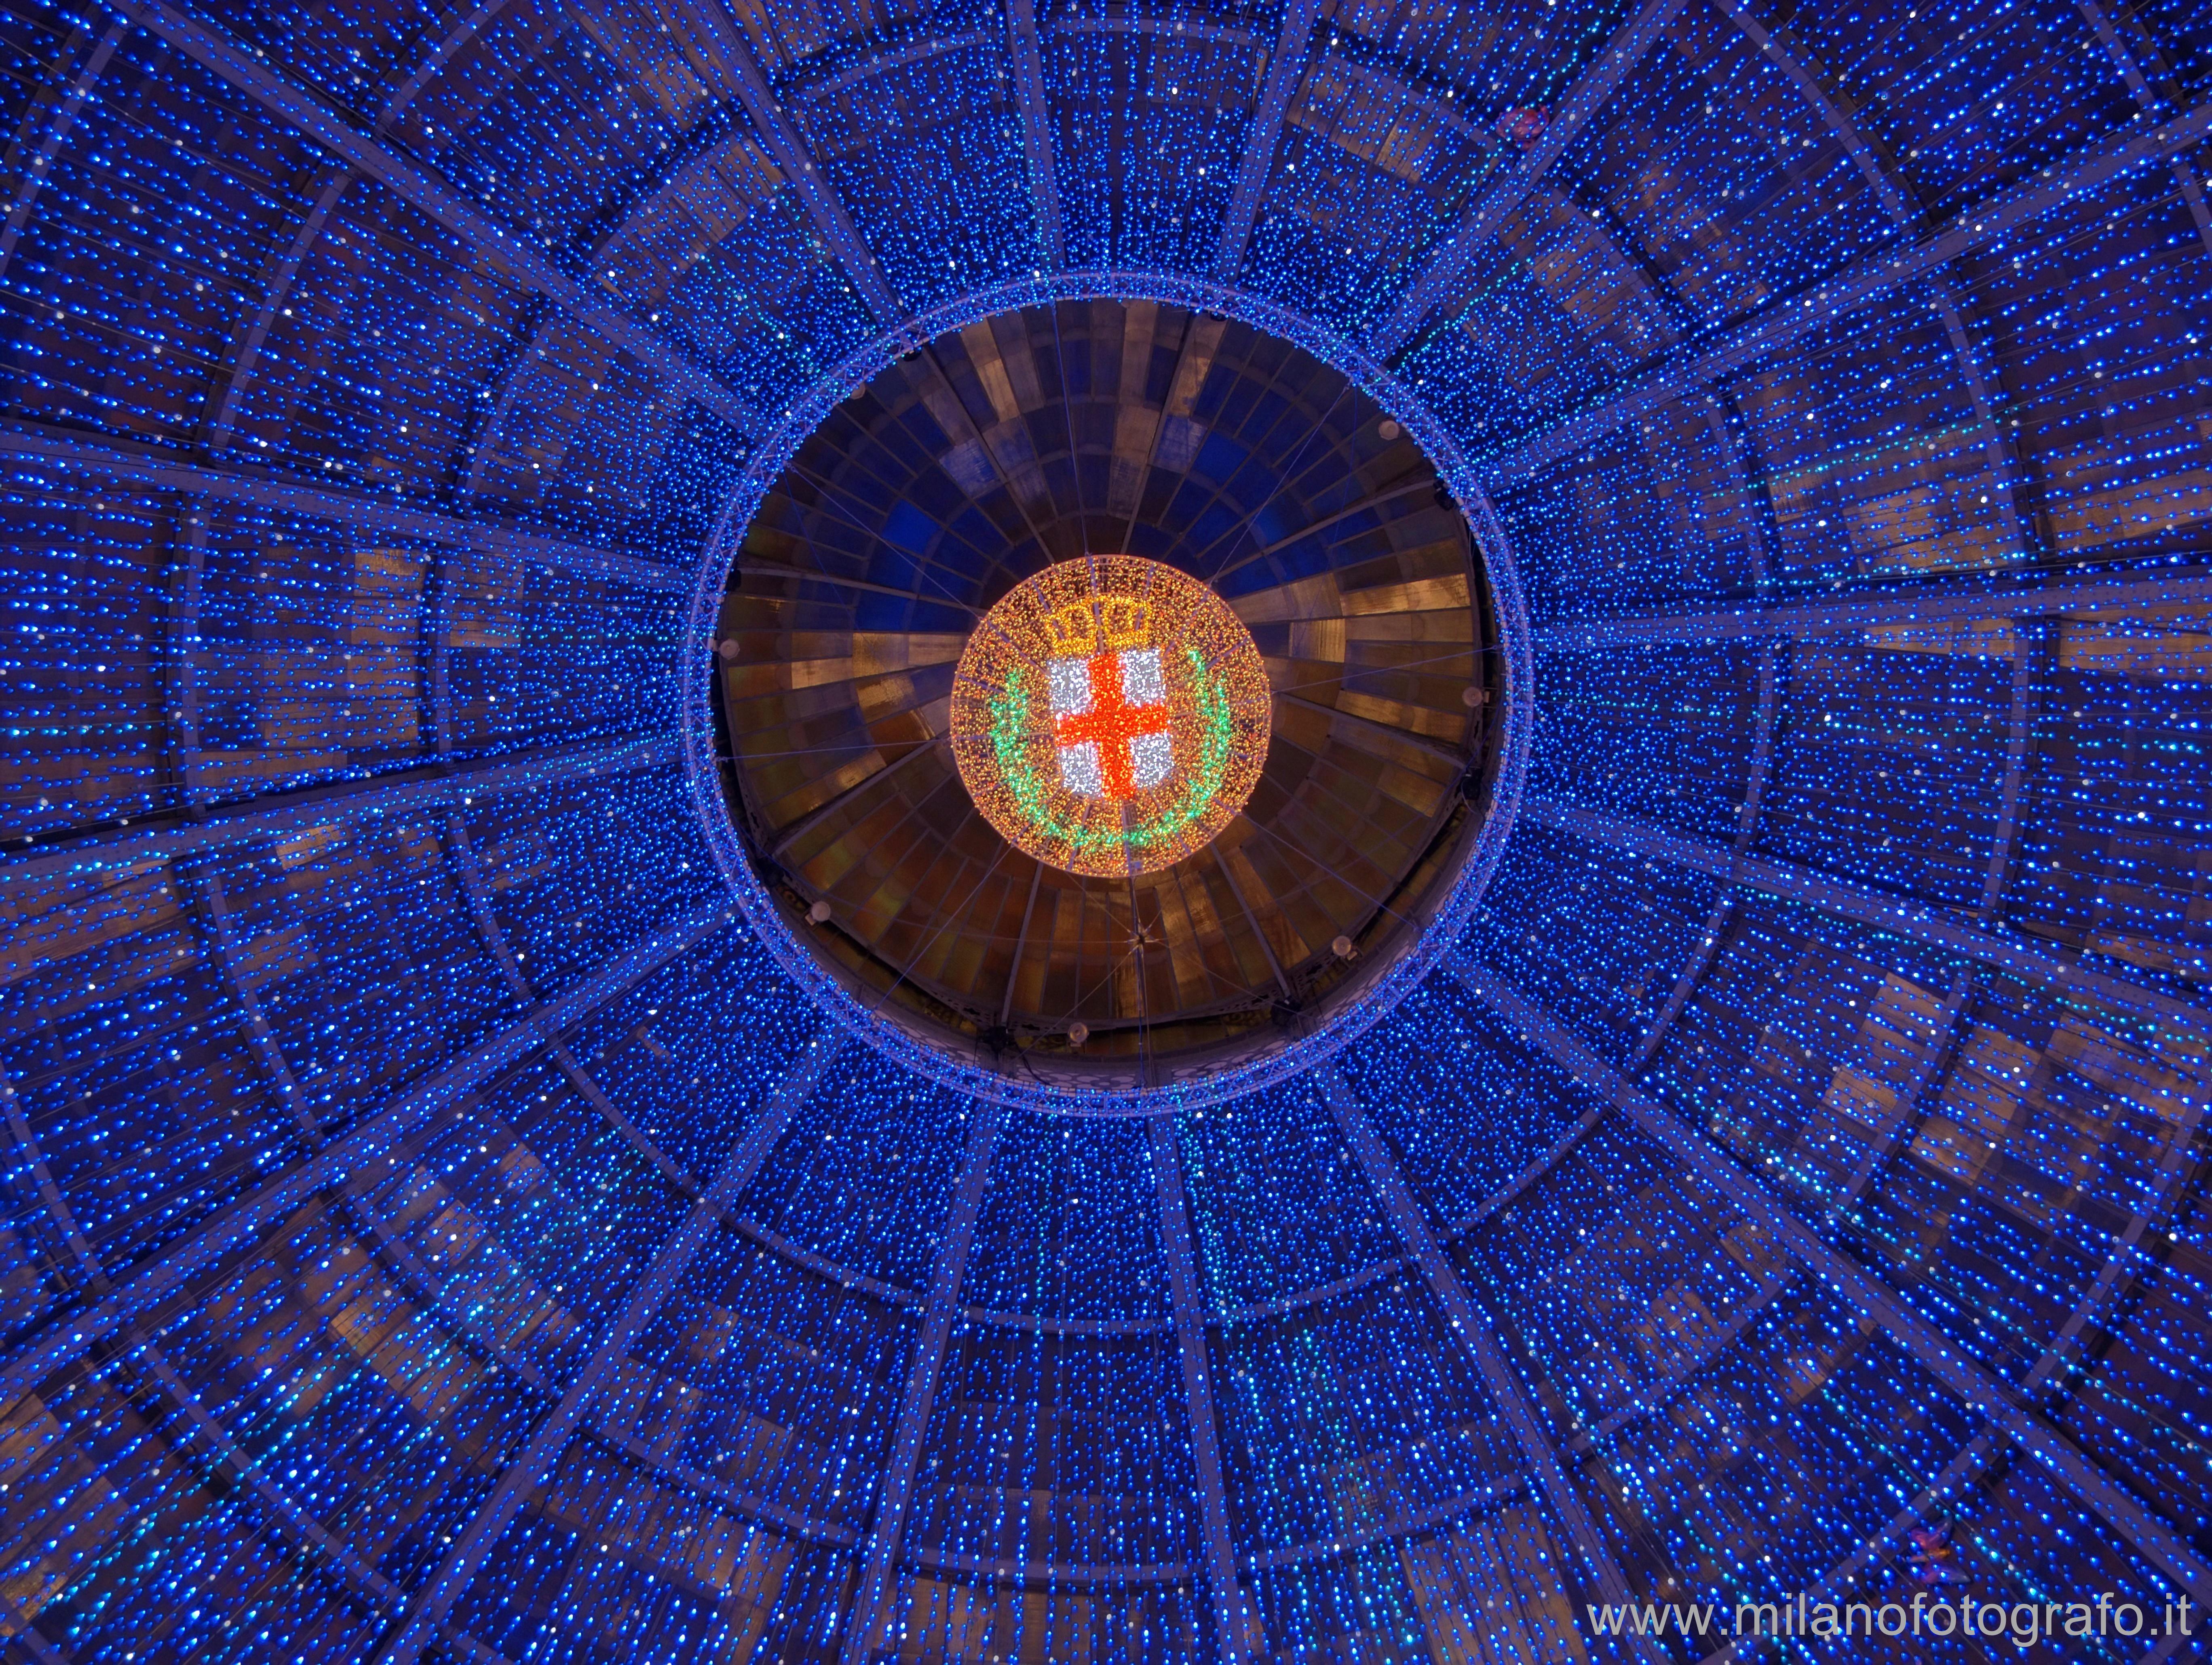 Milan (Italy): The dome of the Galleria Vittorio Emanuele decorated for Christmas - Milan (Italy)